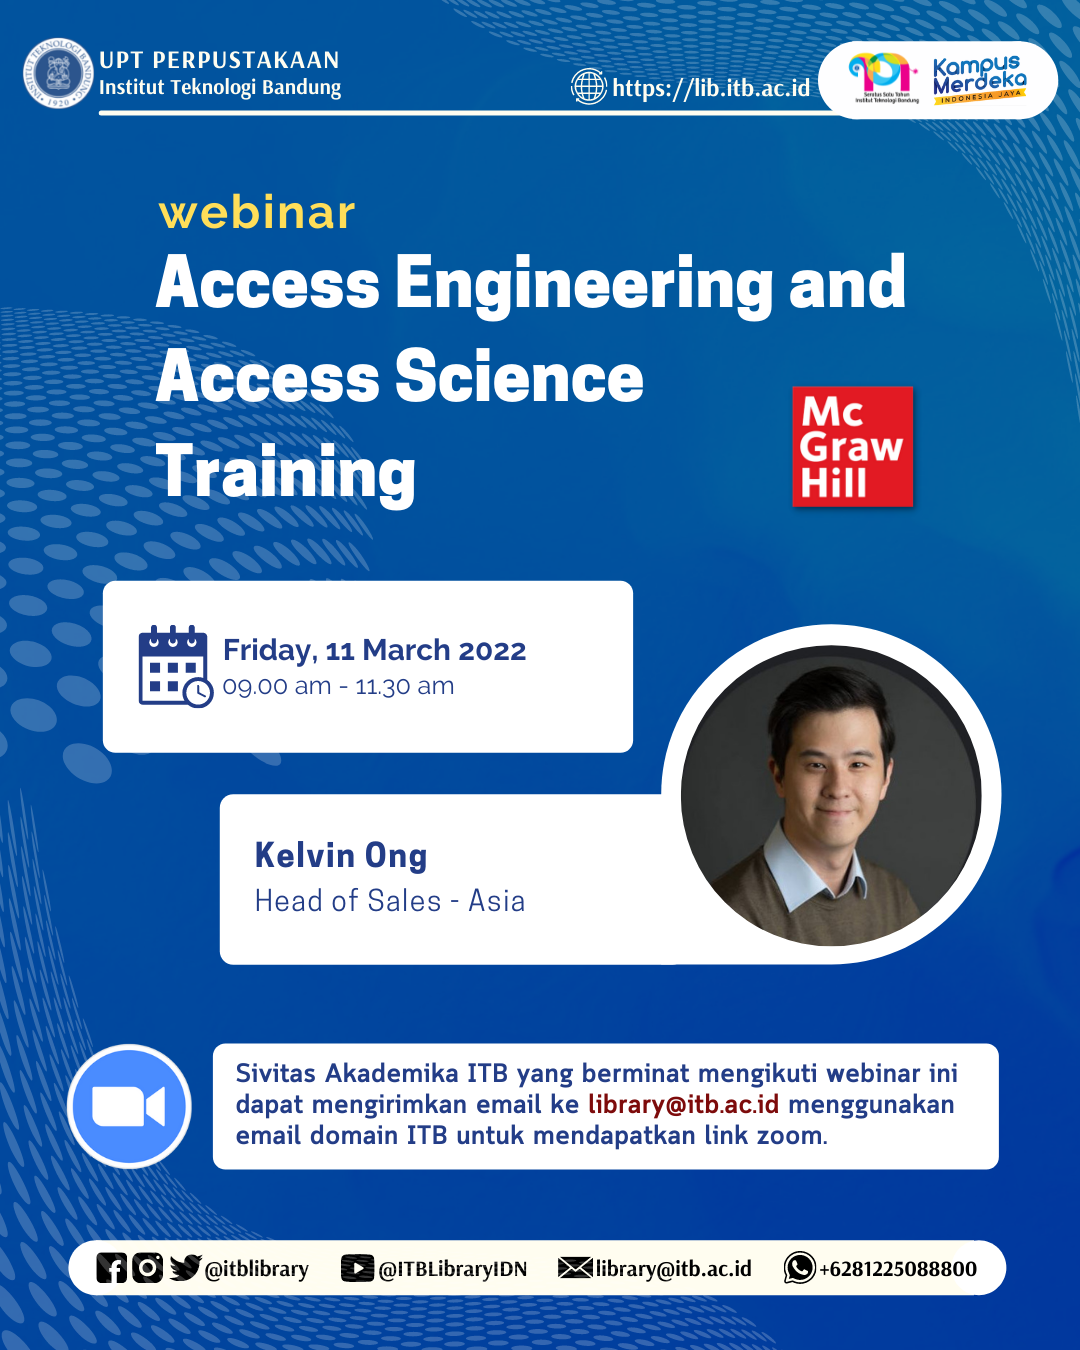 Webinar Access Engineering and Access Science Training (McGRAW Hill)